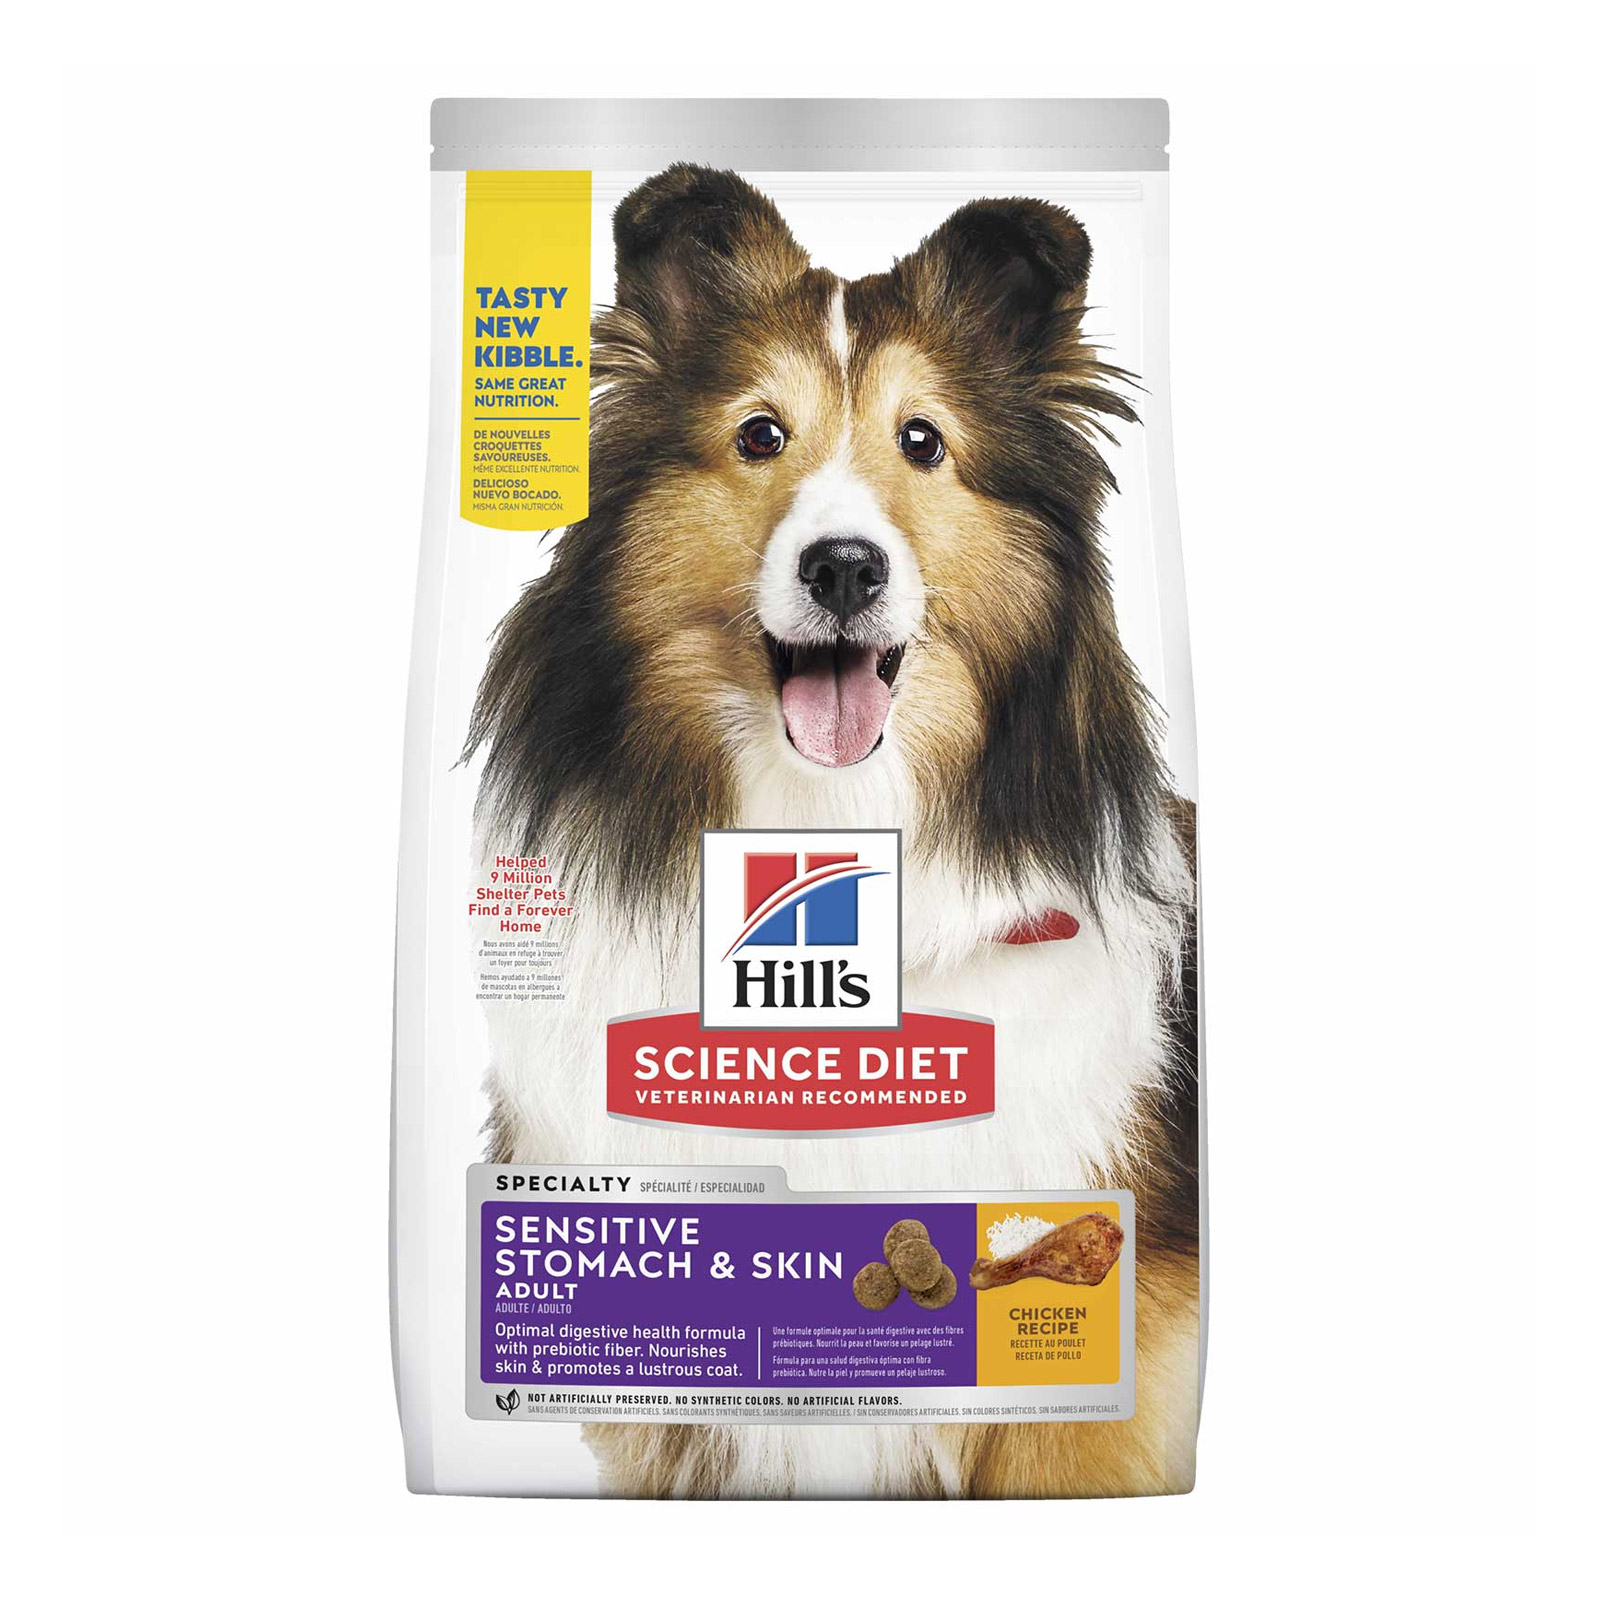 Hill's Science Diet Adult Sensitive Stomach & Skin Chicken Dry Dog Food for Food